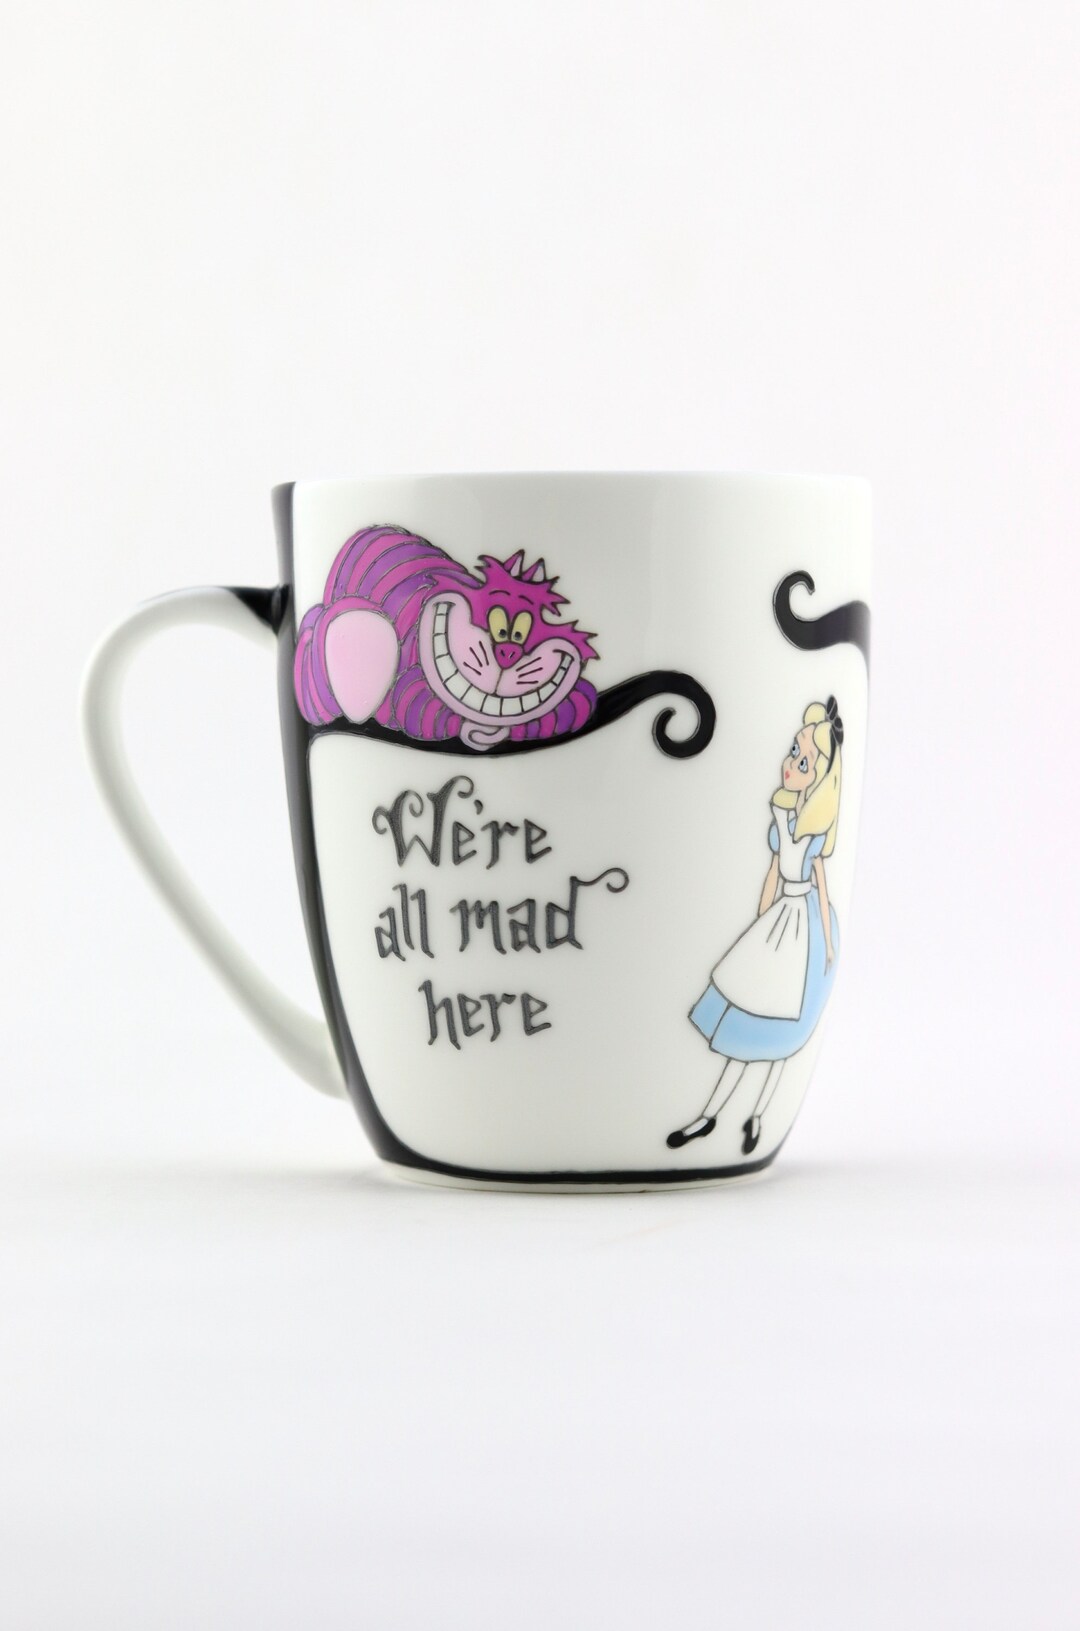 8 Piece Kitchen Set with Alice in Wonderland Custom Etchings by